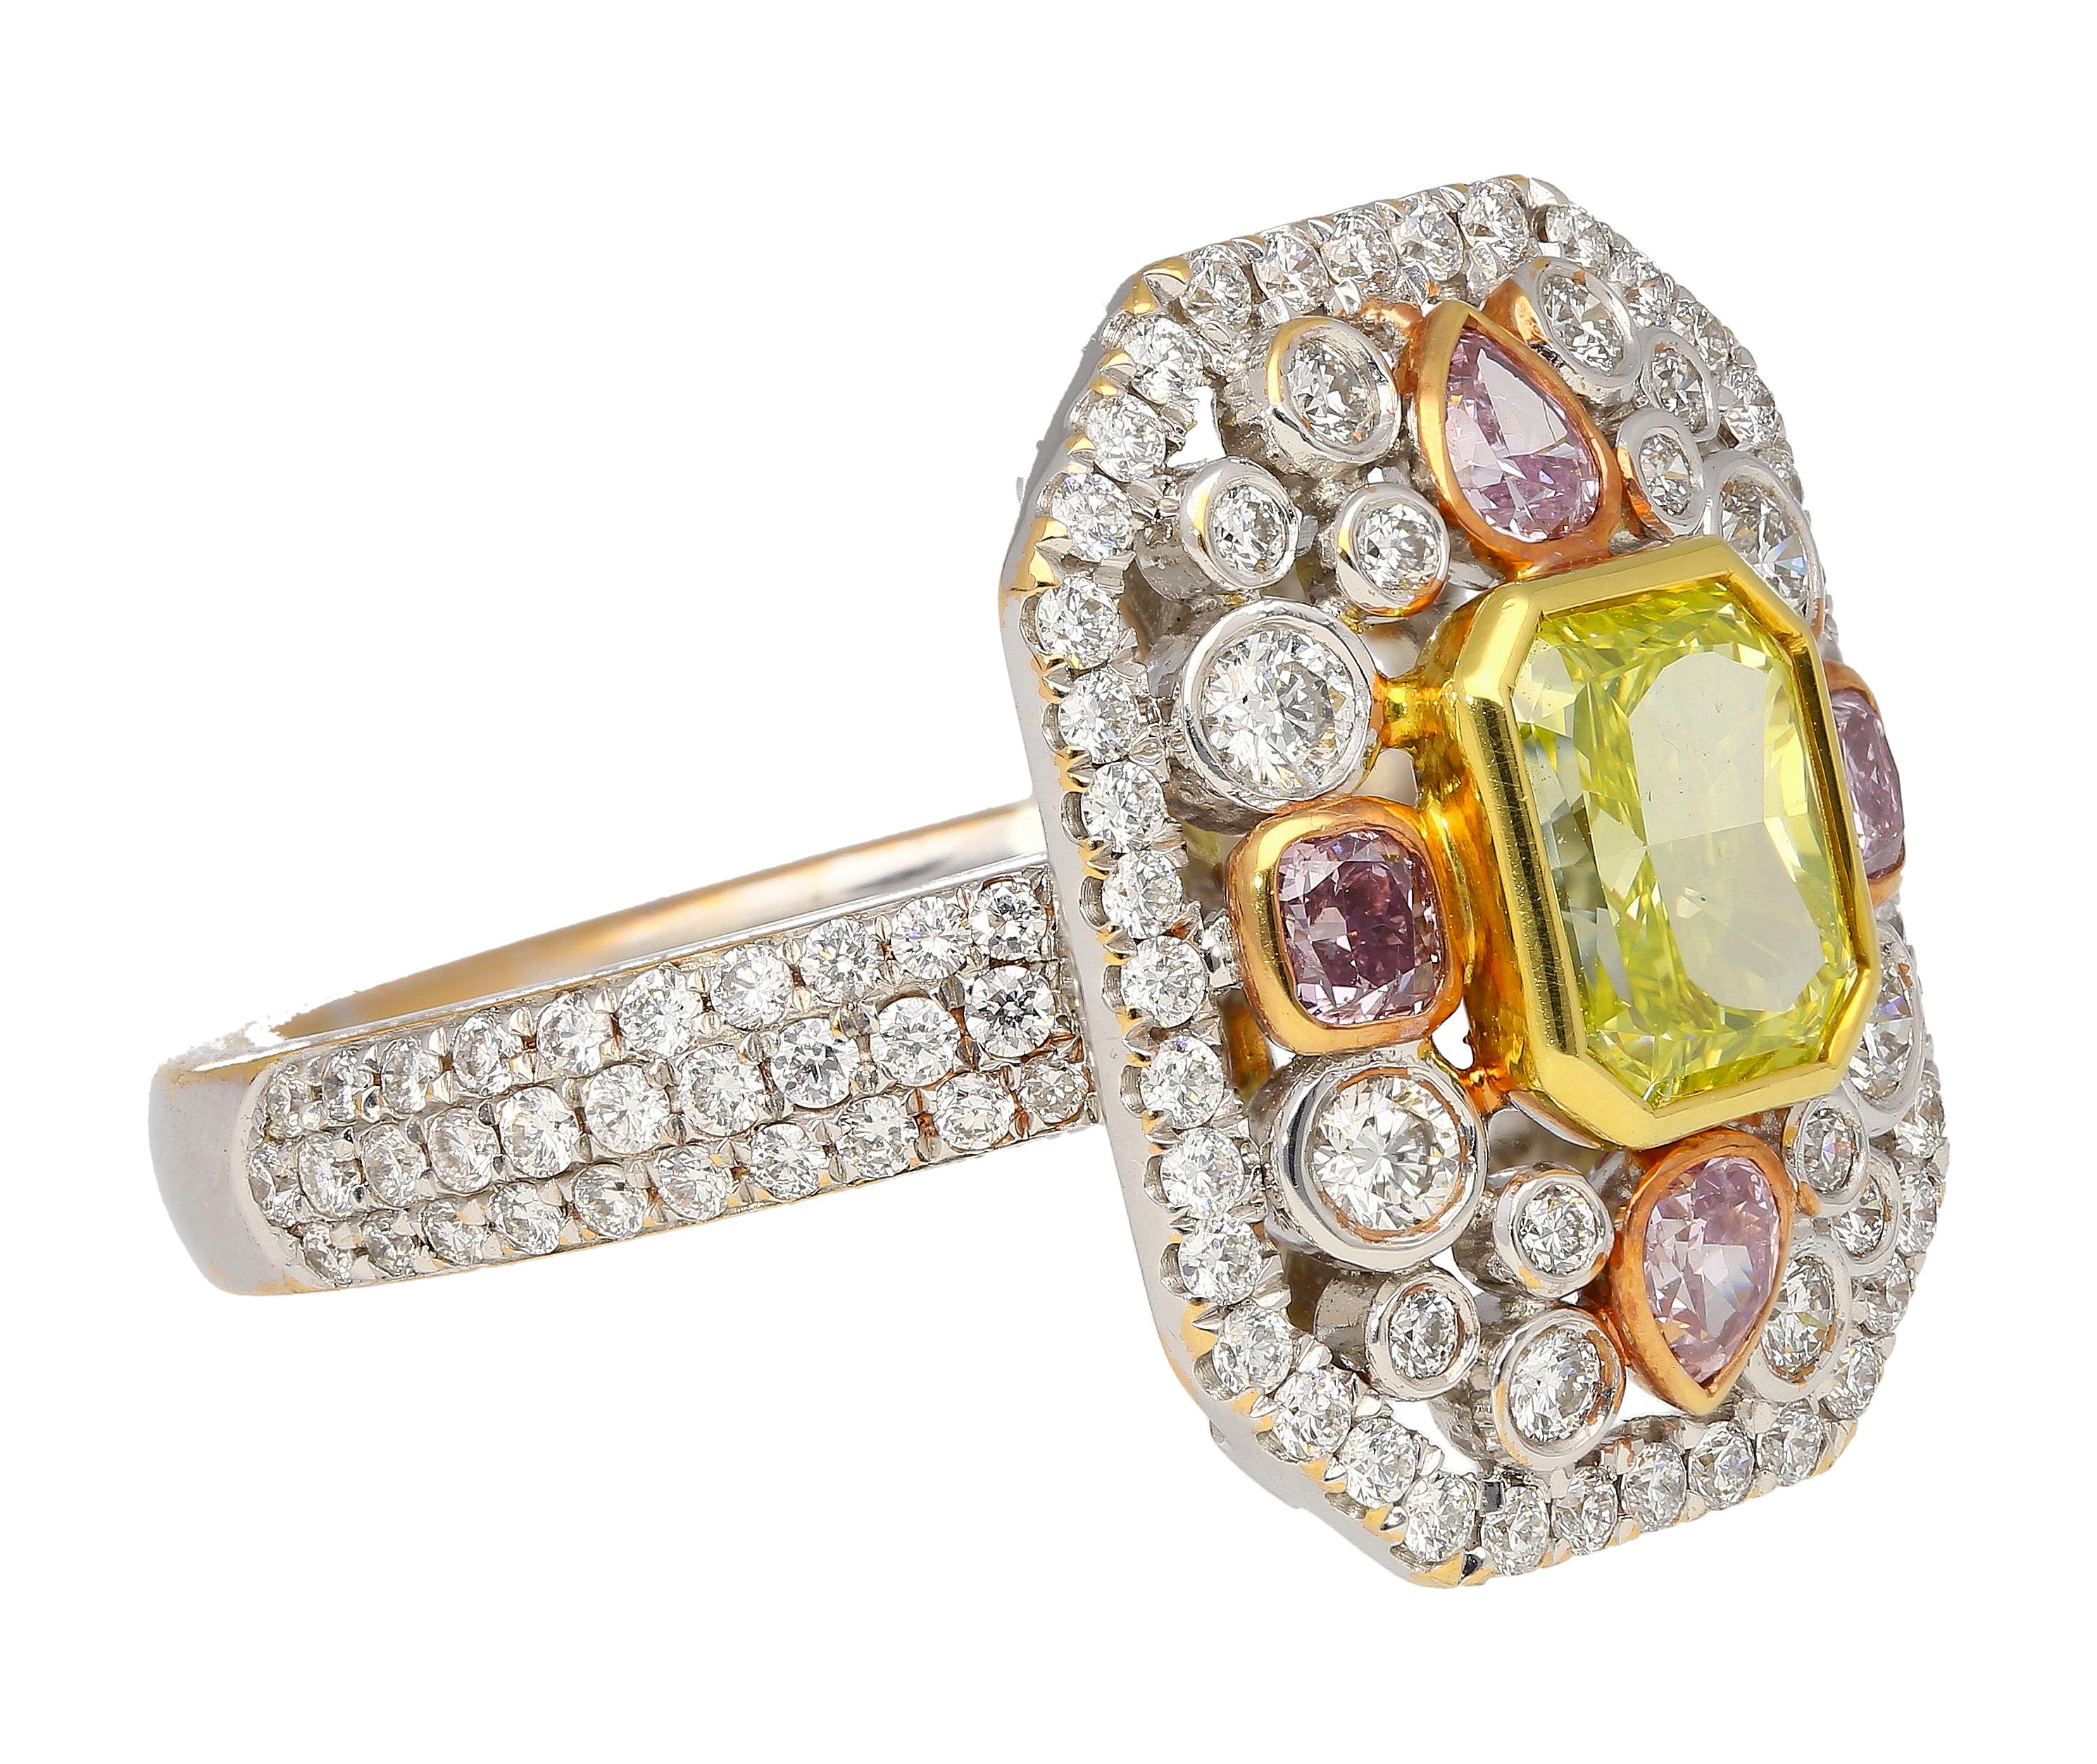 GIA Certified 1.15 Carat Radiant Cut Fancy Intense Yellowish Green Diamond Ring In New Condition For Sale In Miami, FL